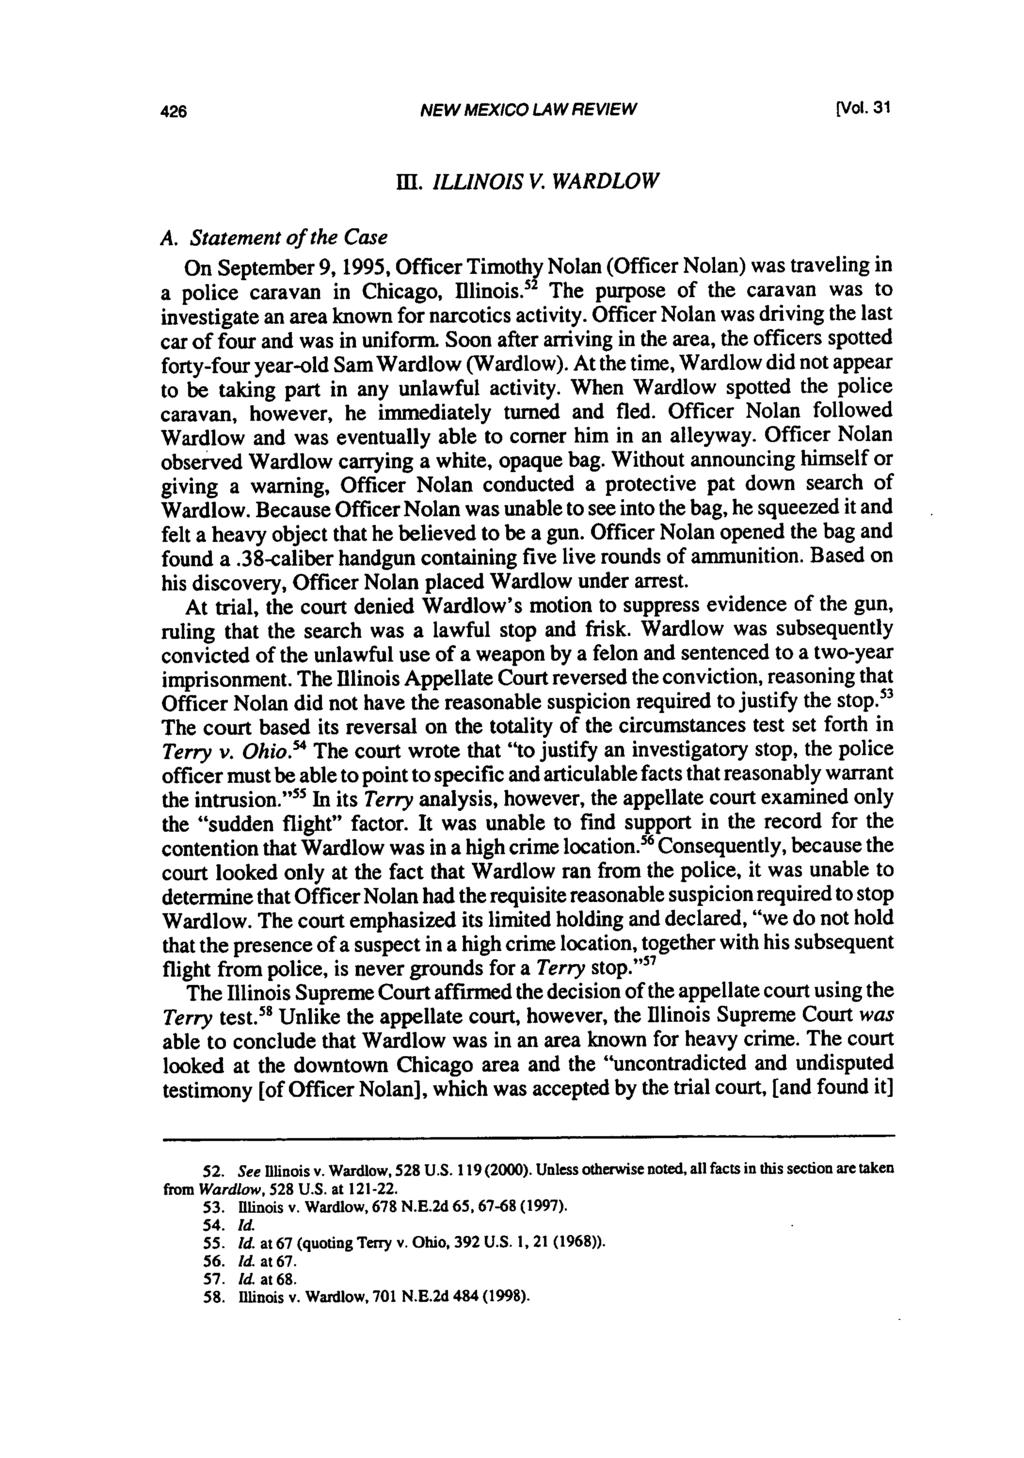 NEW MEXICO LAW REVIEW [Vol. 31 I. ILLINOIS V. WARDLOW A. Statement of the Case On September 9, 1995, Officer Timothy Nolan (Officer Nolan) was traveling in a police caravan in Chicago, Illinois.